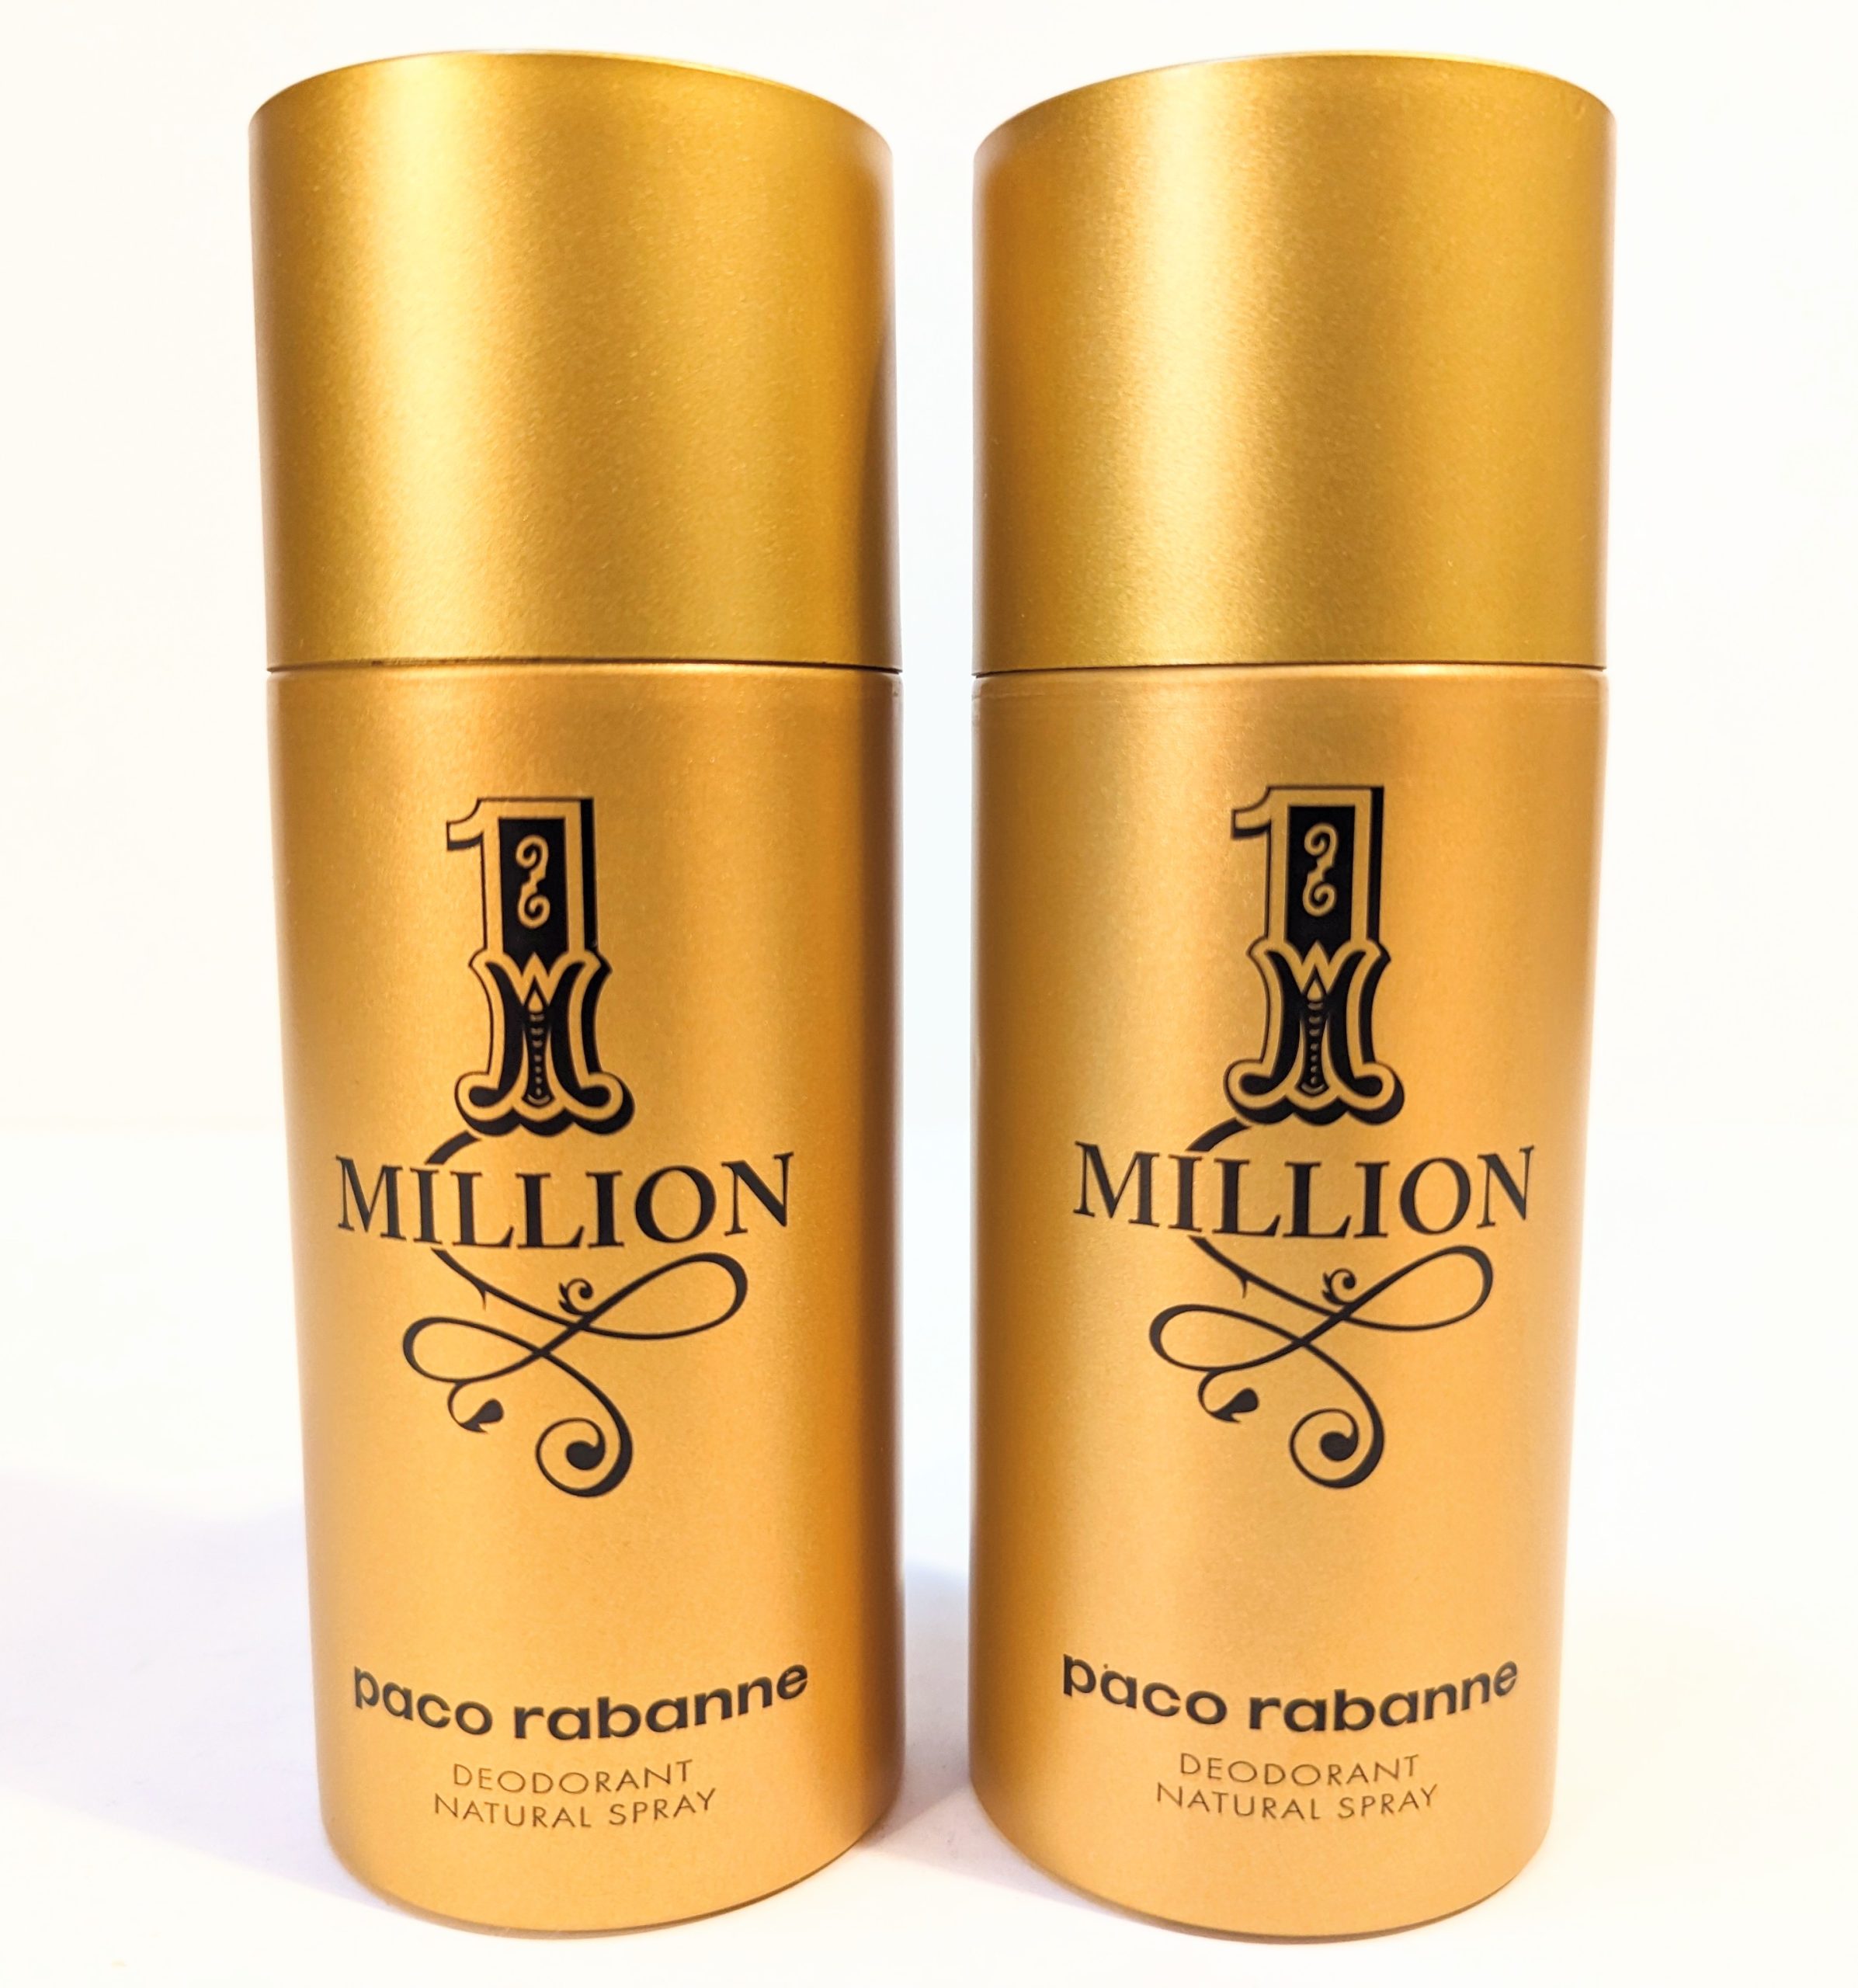 Two gold cylindrical deodorant spray cans with “1 Million” and “paco rabanne” text on the front, positioned side by side against a white background.